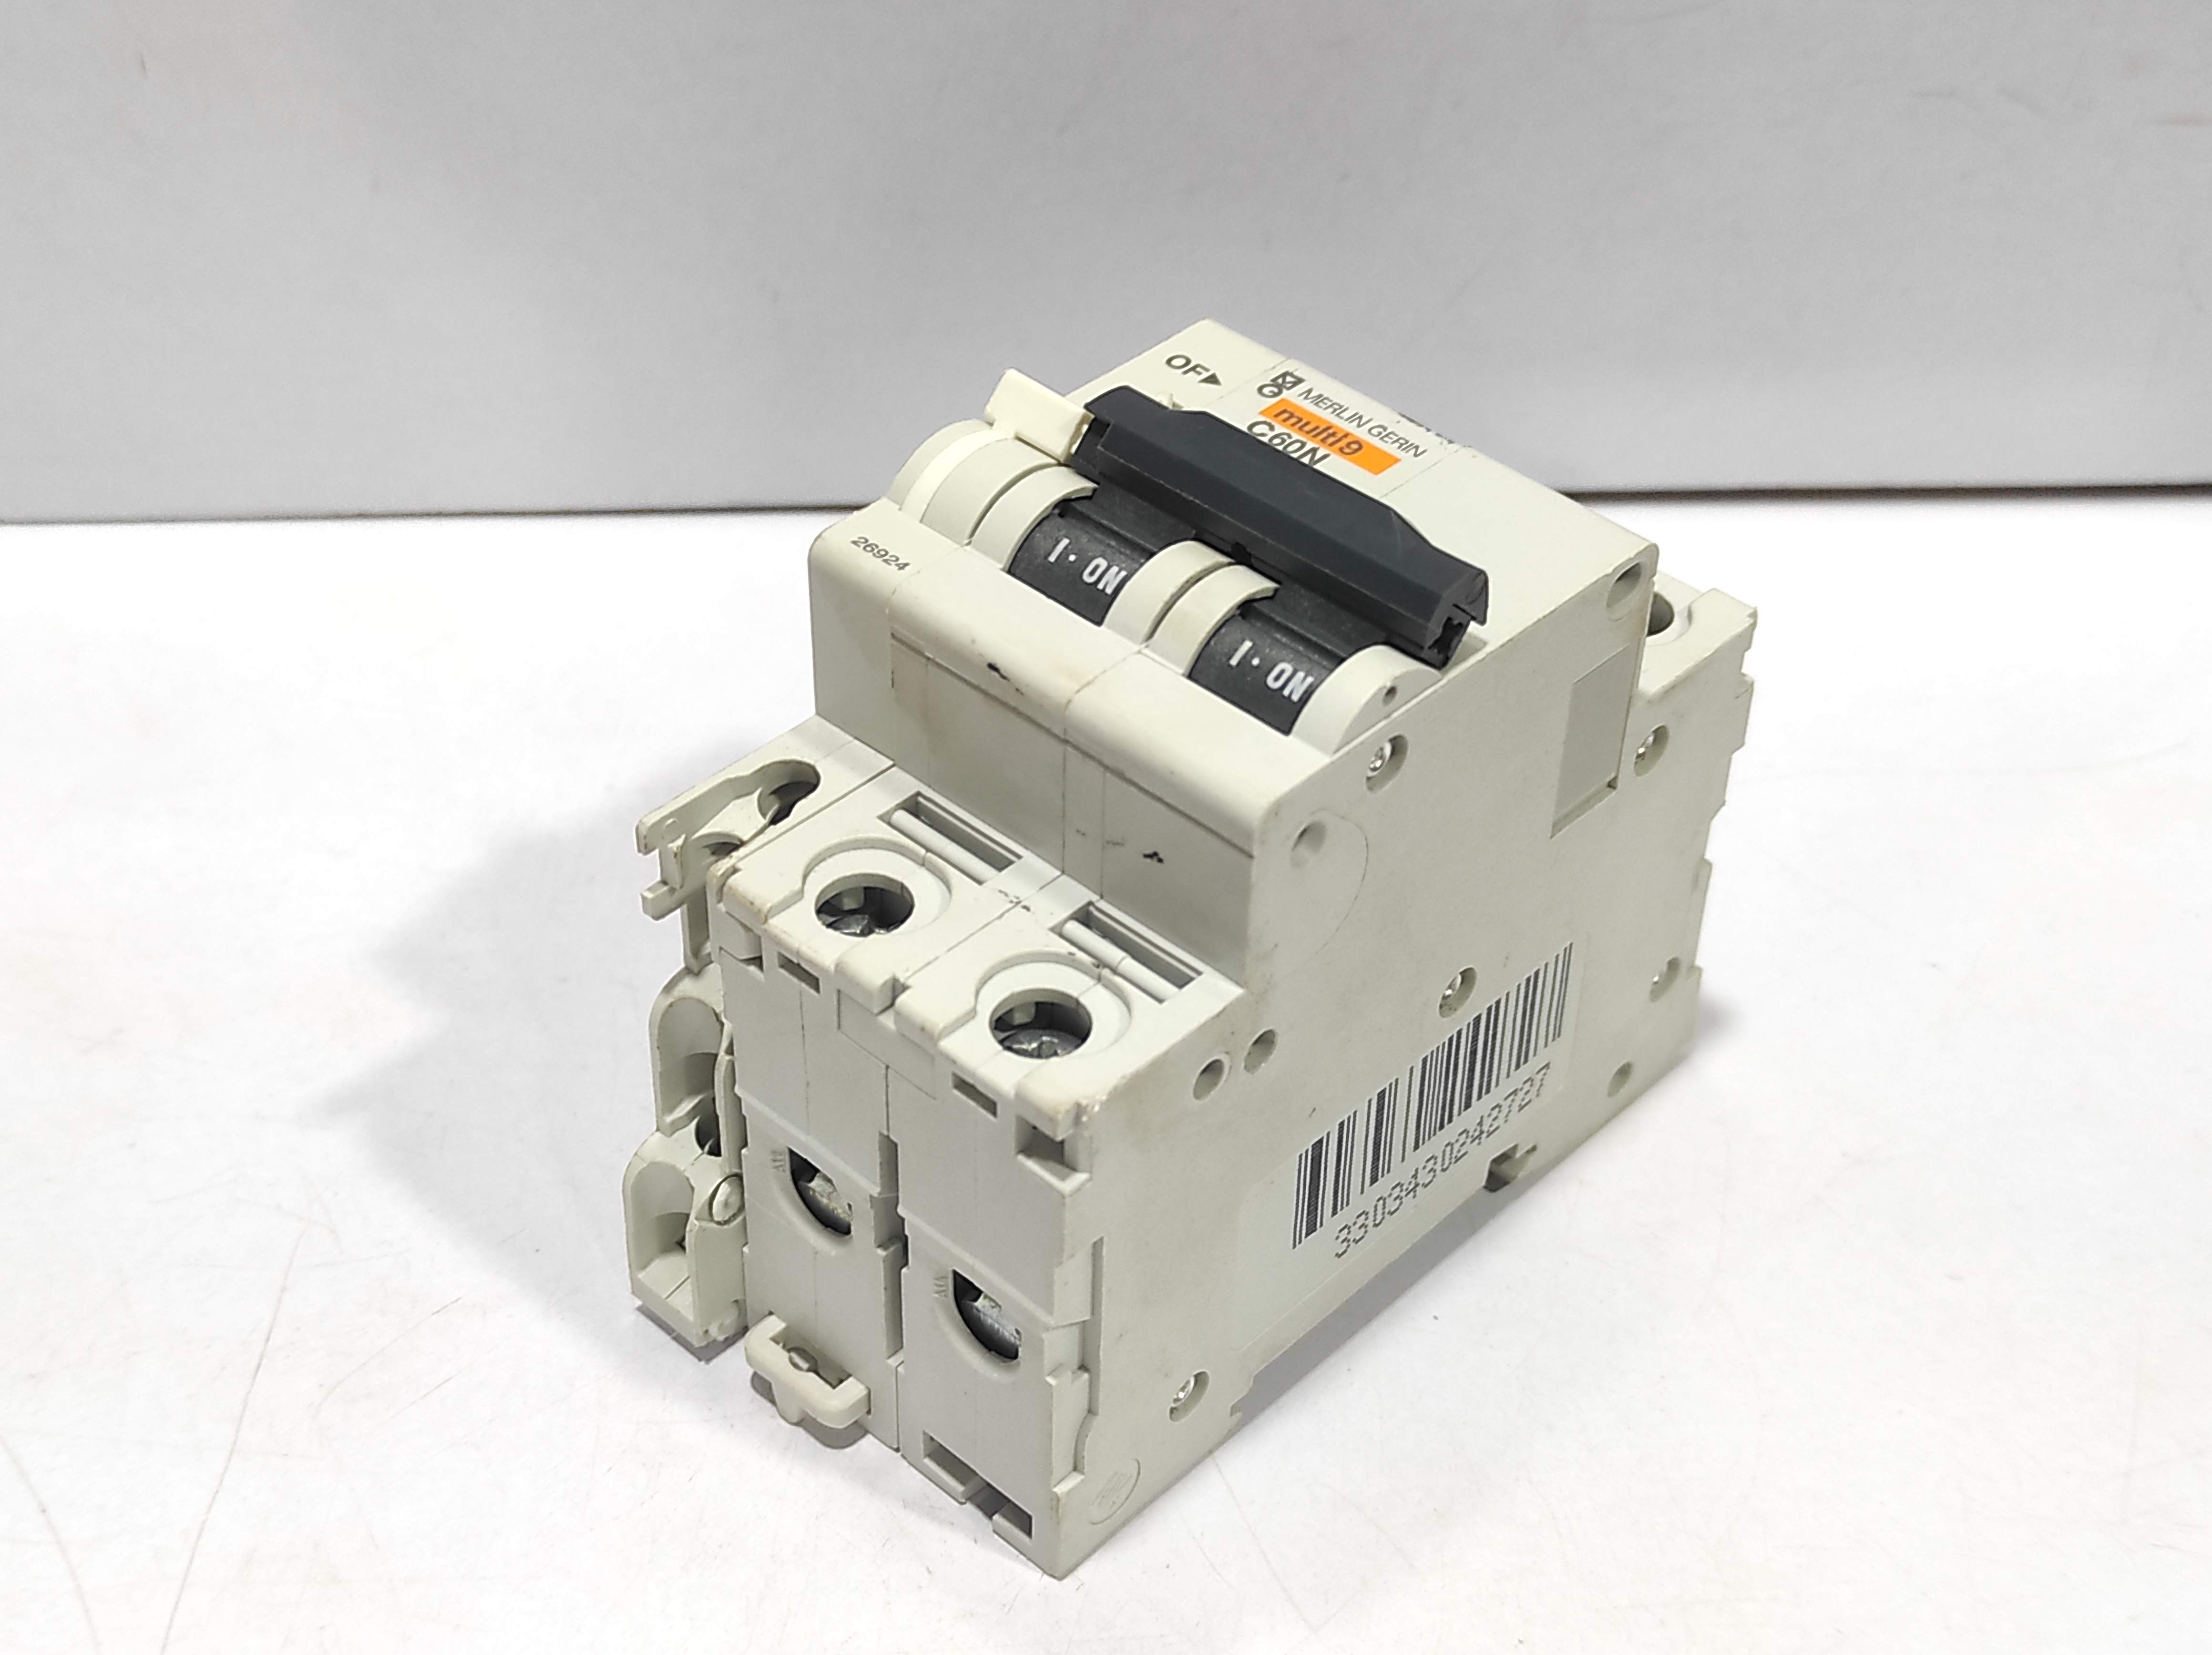 Merlin Gerin Multi 9 C60N C25 Circuit Breaker With Schneider 26924 Auxiliary Contact Block